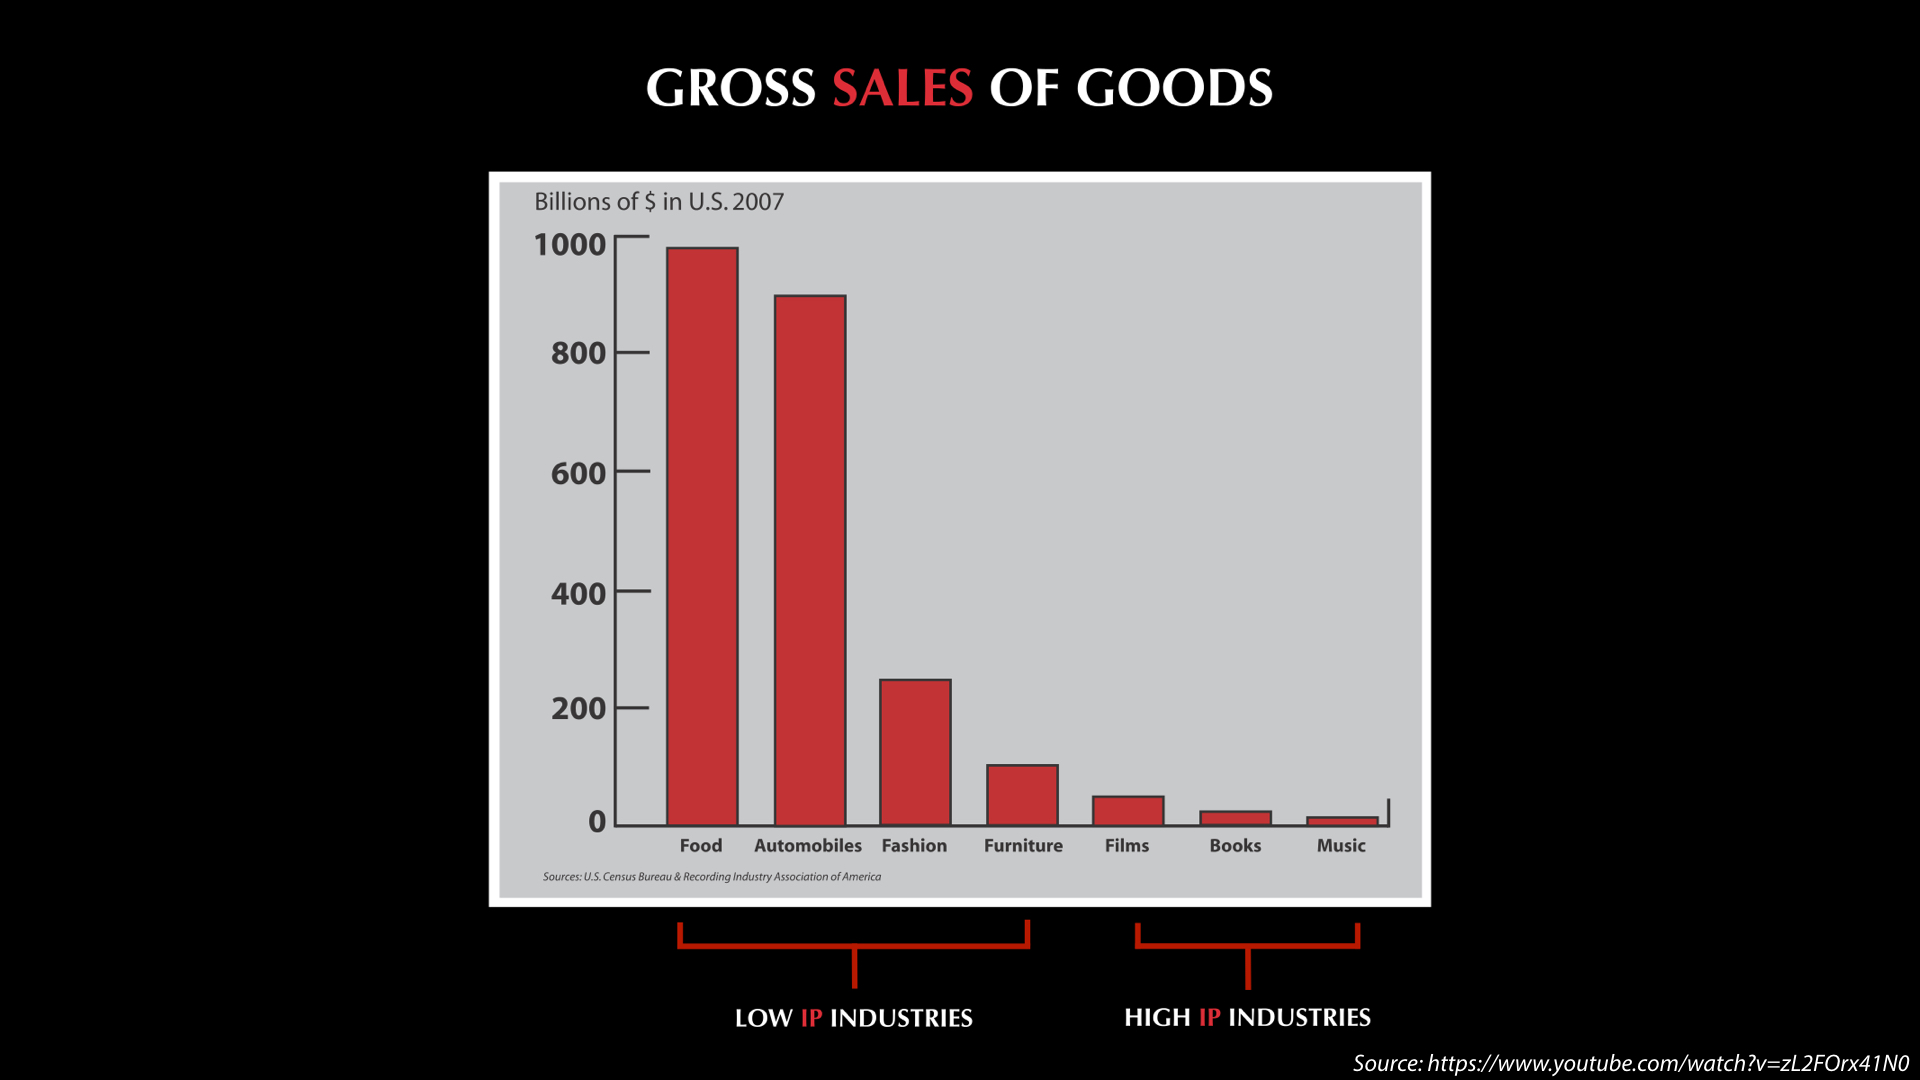 Gross sales of goods in low and high IP industries